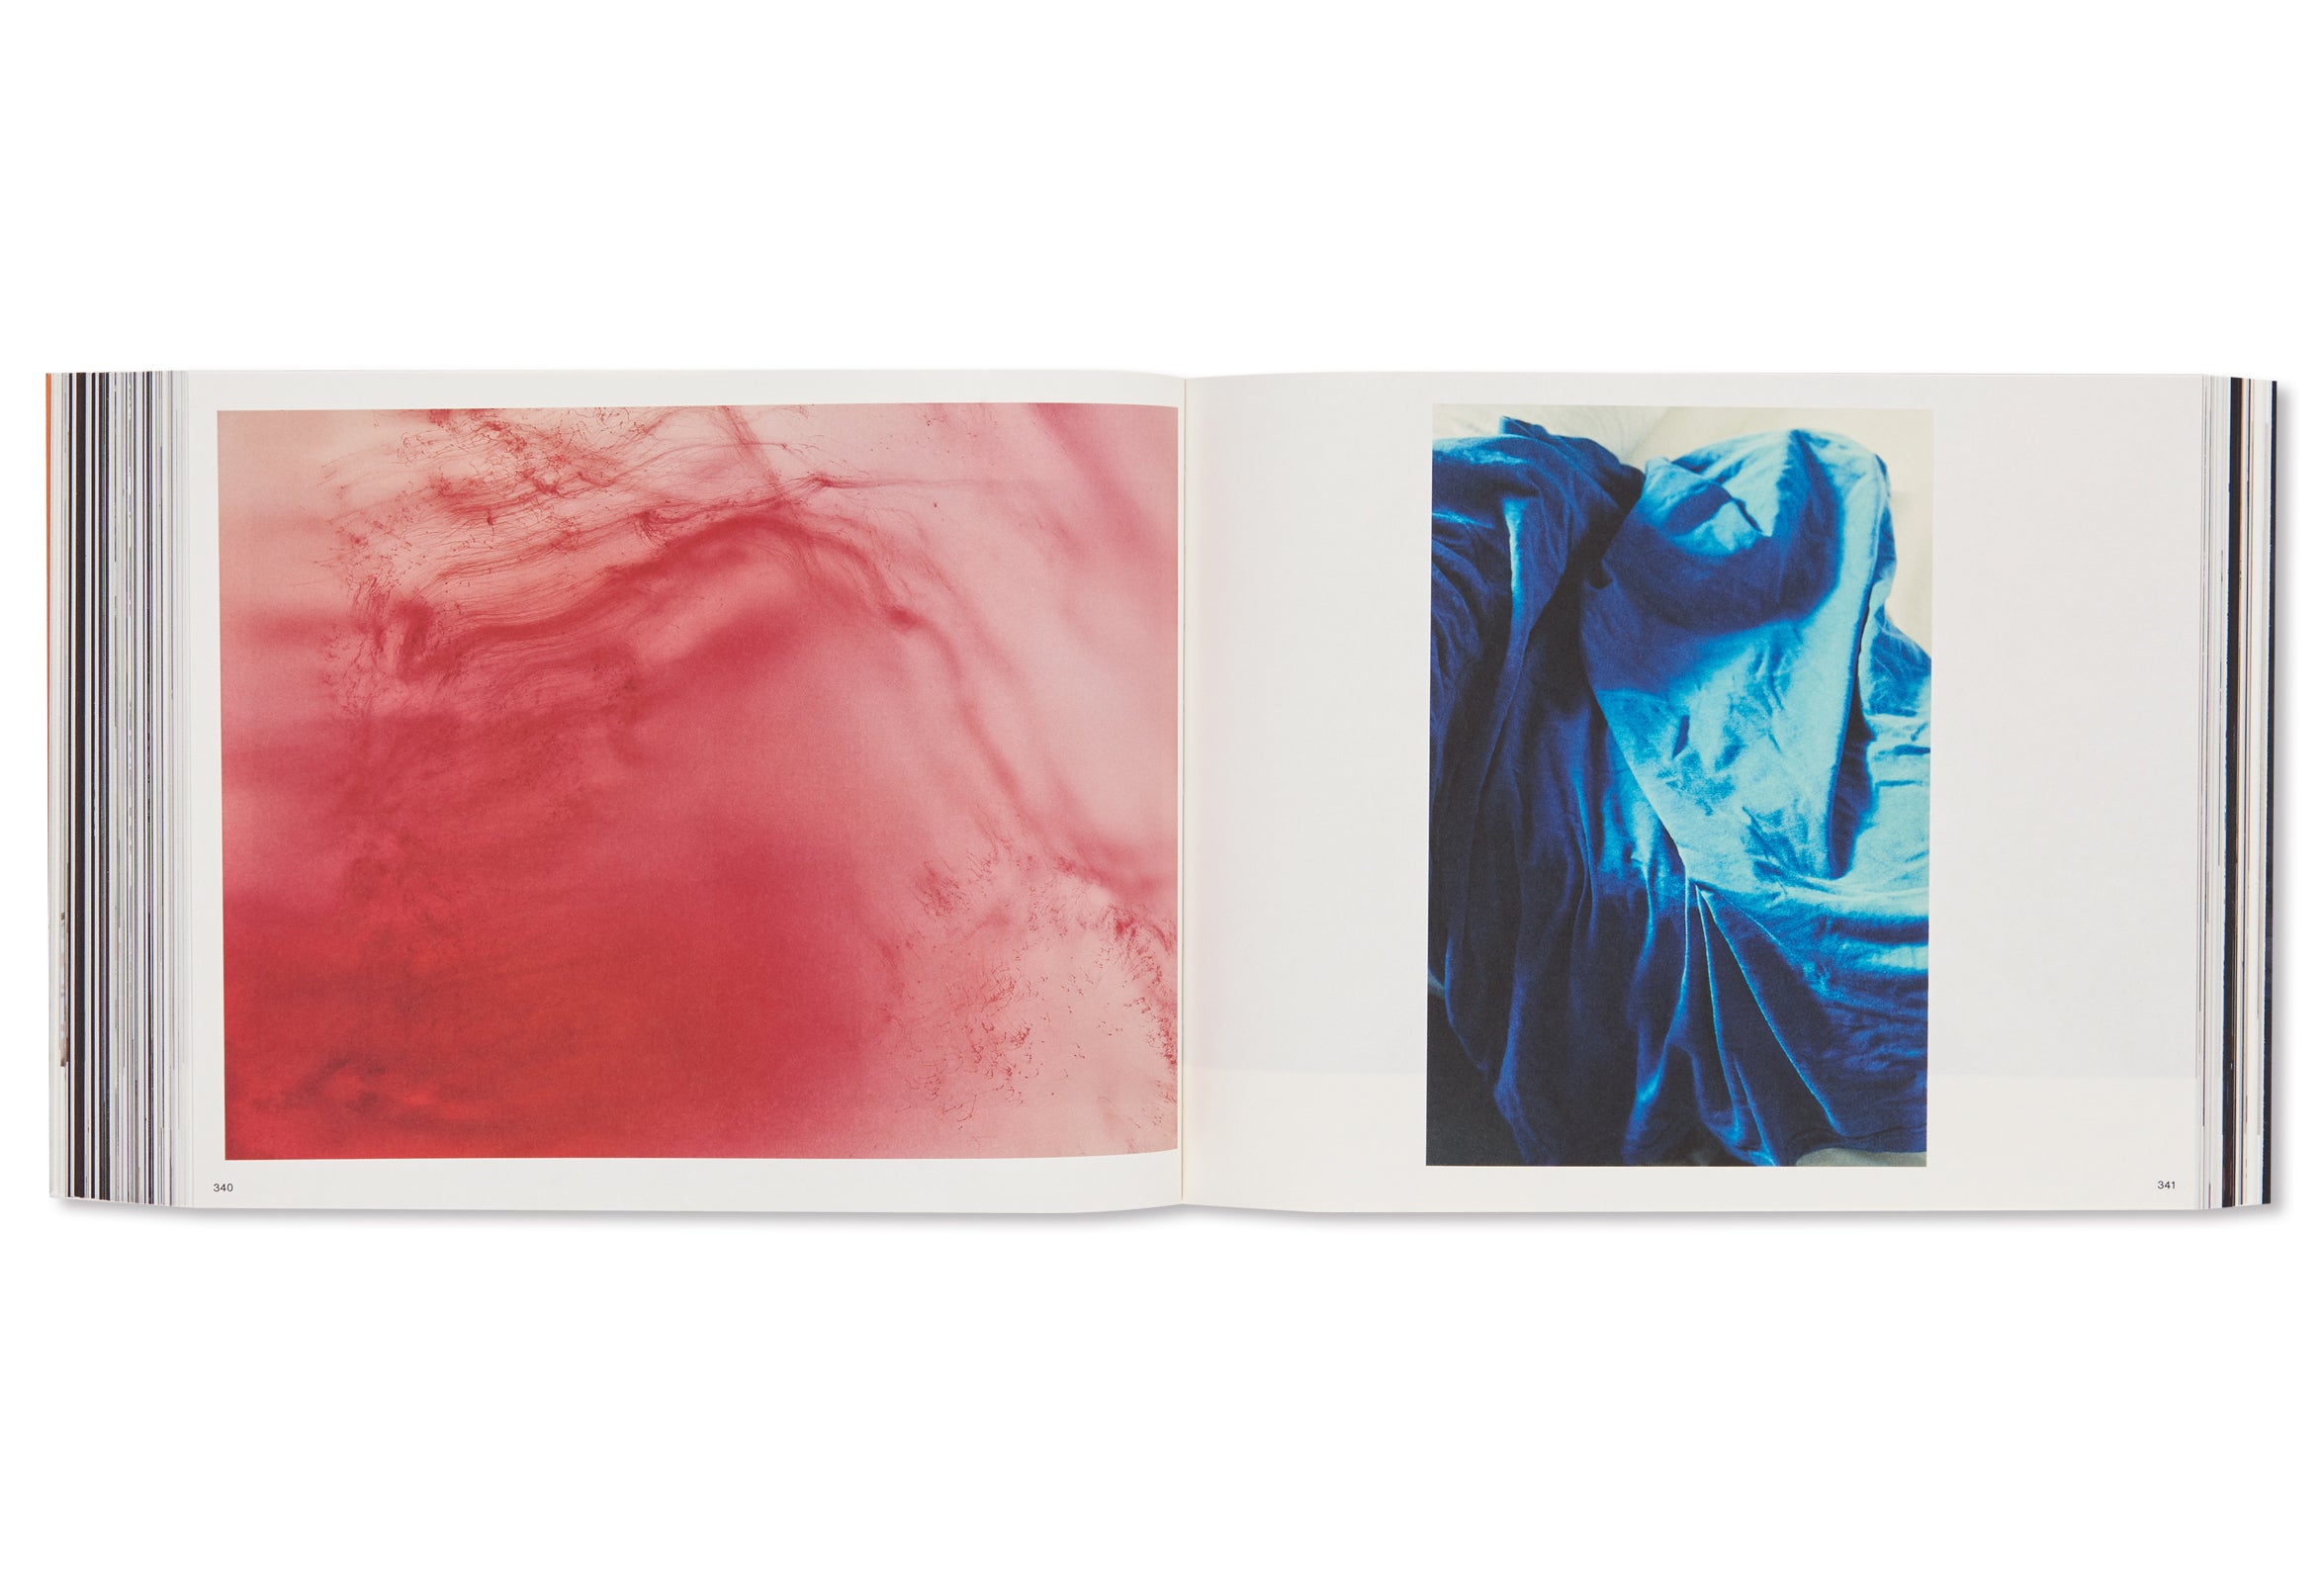 TODAY IS THE FIRST DAY by Wolfgang Tillmans